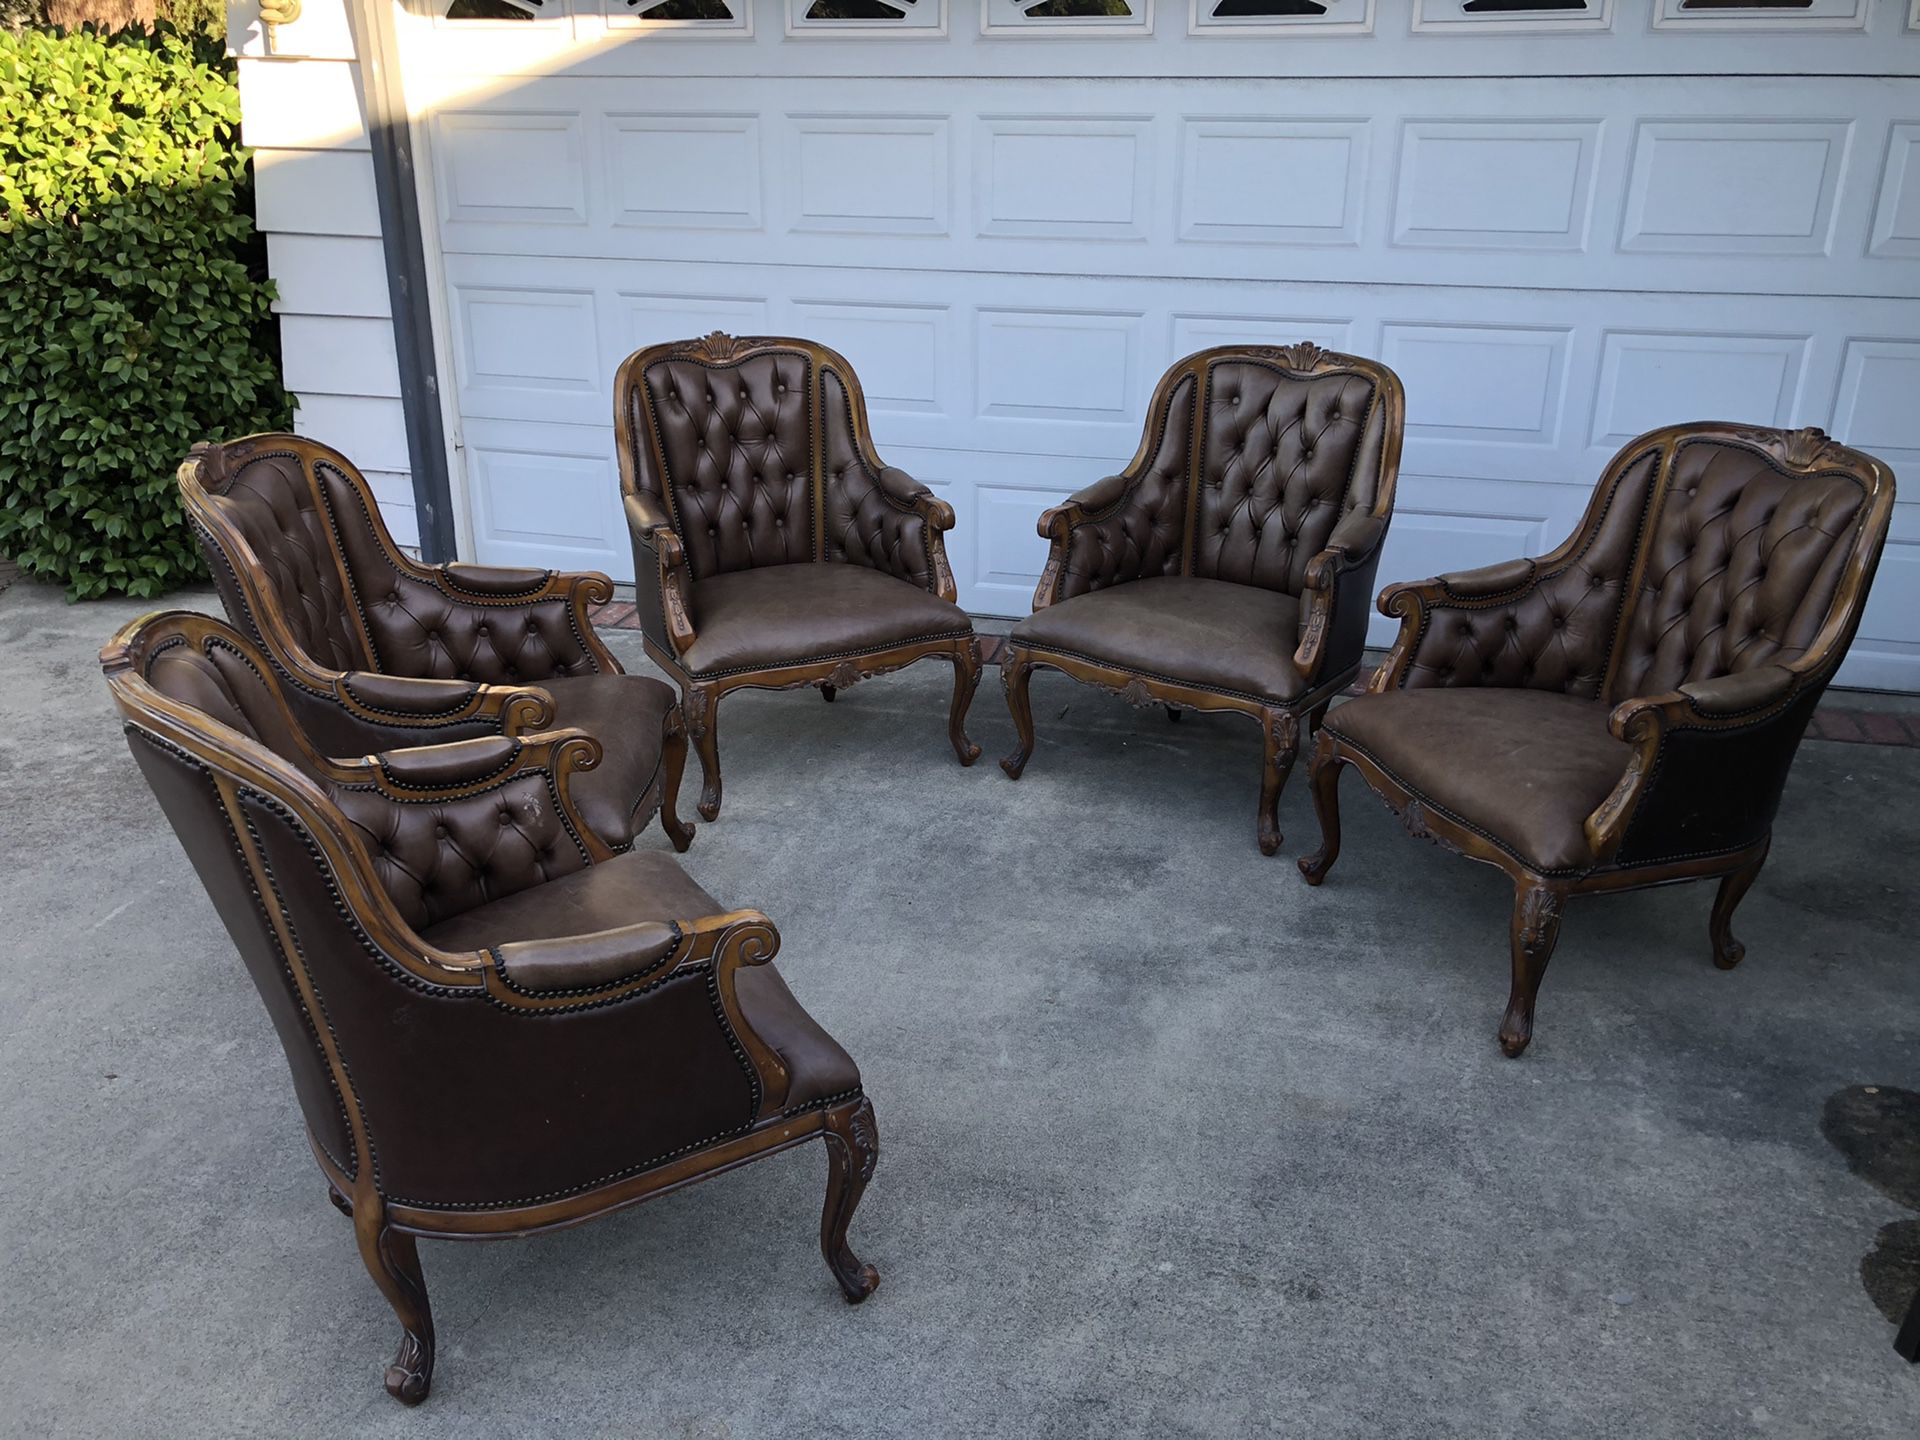 Vintage Tufted Leather Chairs